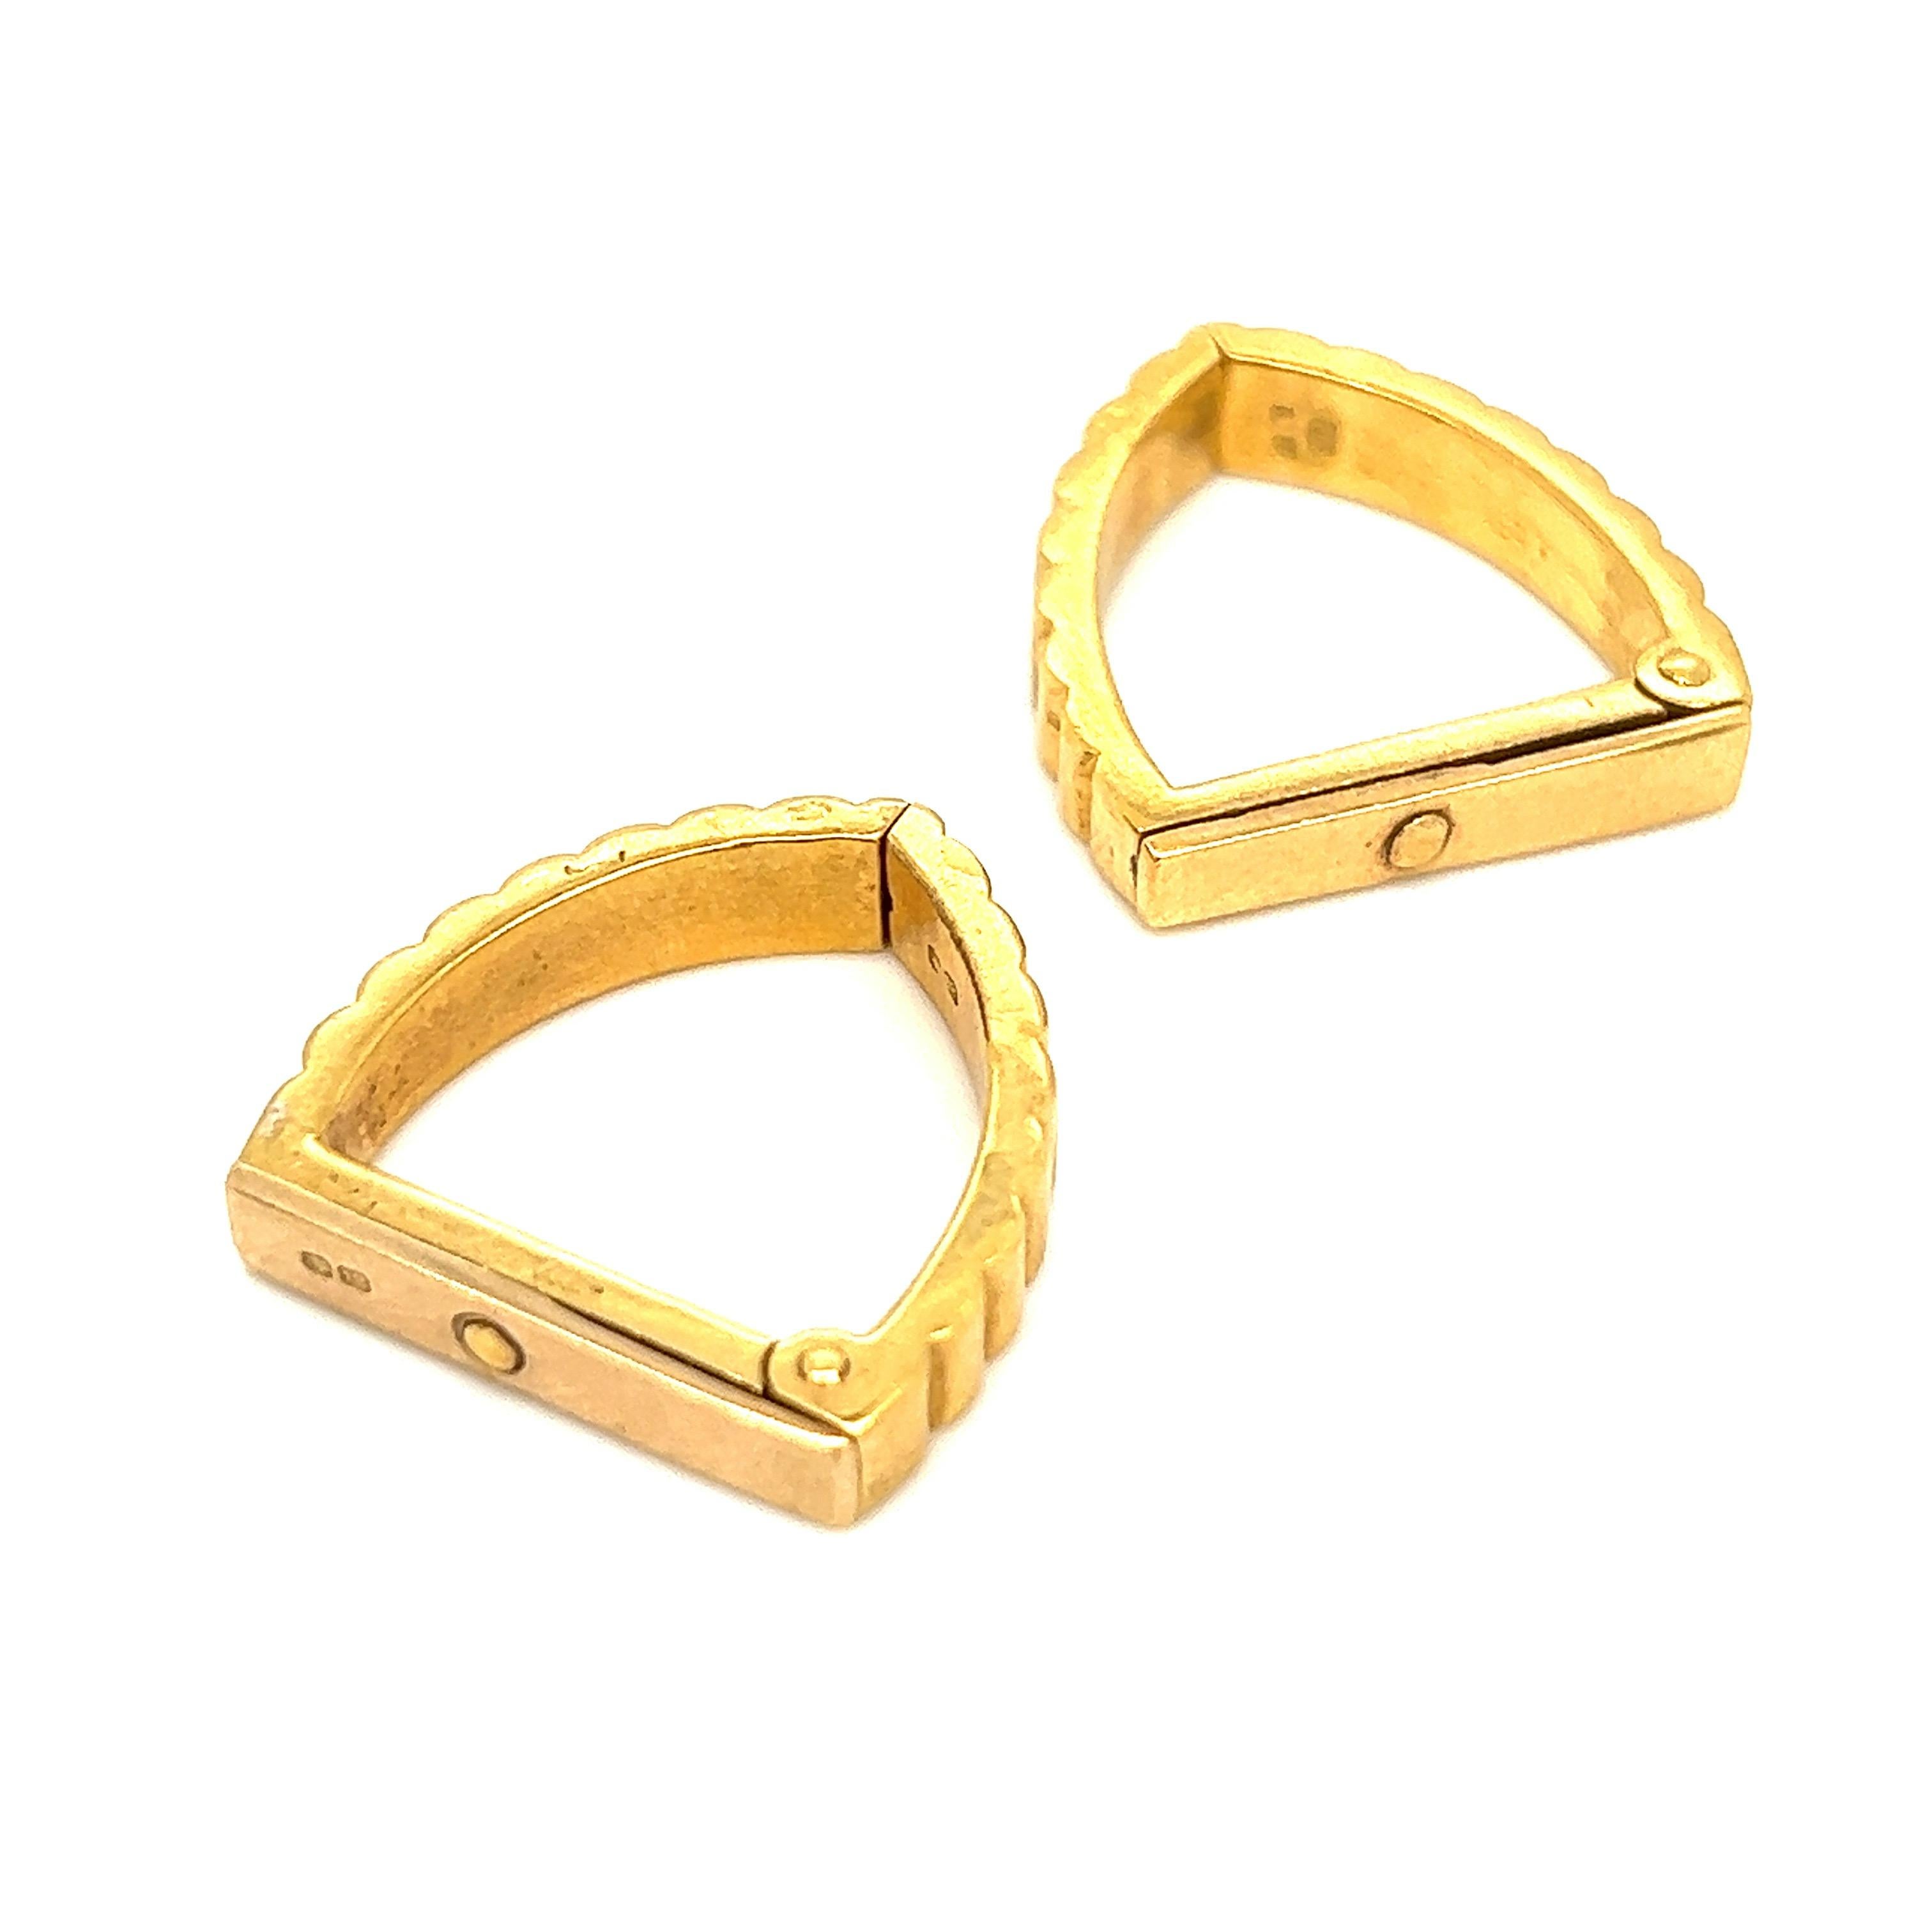 Cartier Gold Cufflinks In Good Condition For Sale In New York, NY